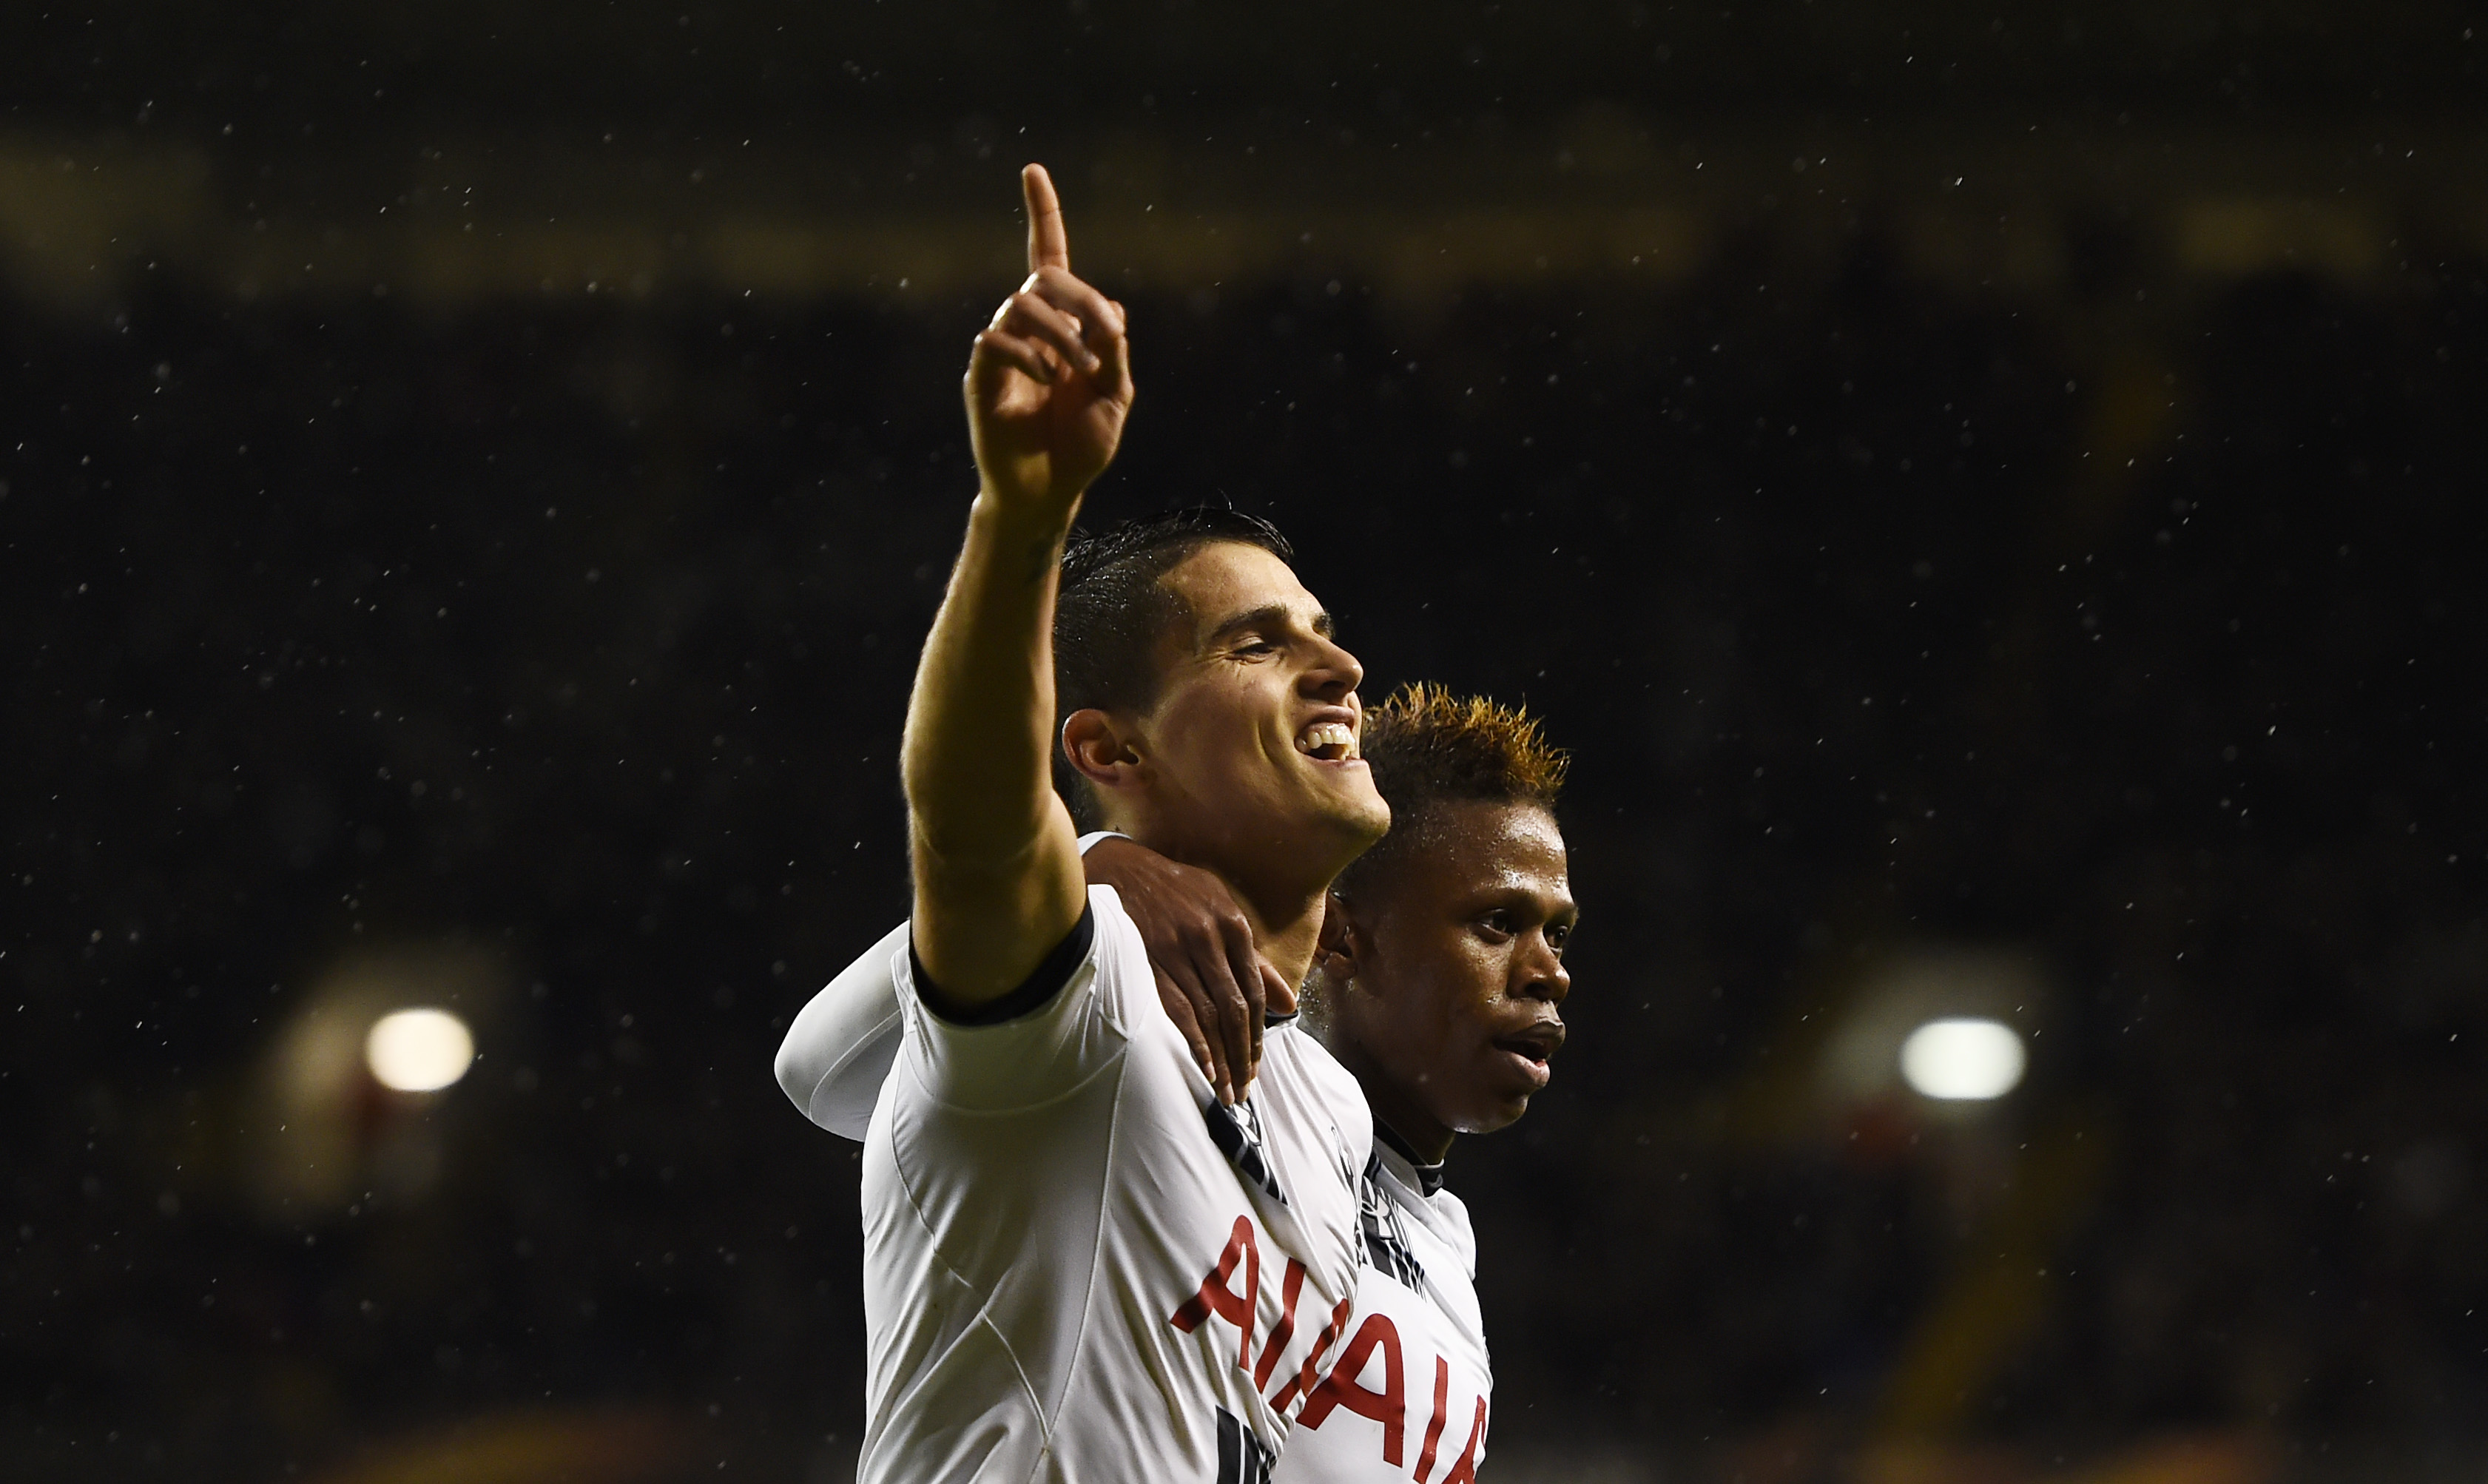 Football Soccer - Tottenham Hotspur v AS Monaco - UEFA Europa League Group Stage - Group J - White Hart Lane, London, England - 10/12/15 Tottenham's Erik Lamela celebrates scoring their third goal and completing his hat-trick with Clinton Njie Reuters / Dylan Martinez Livepic EDITORIAL USE ONLY.